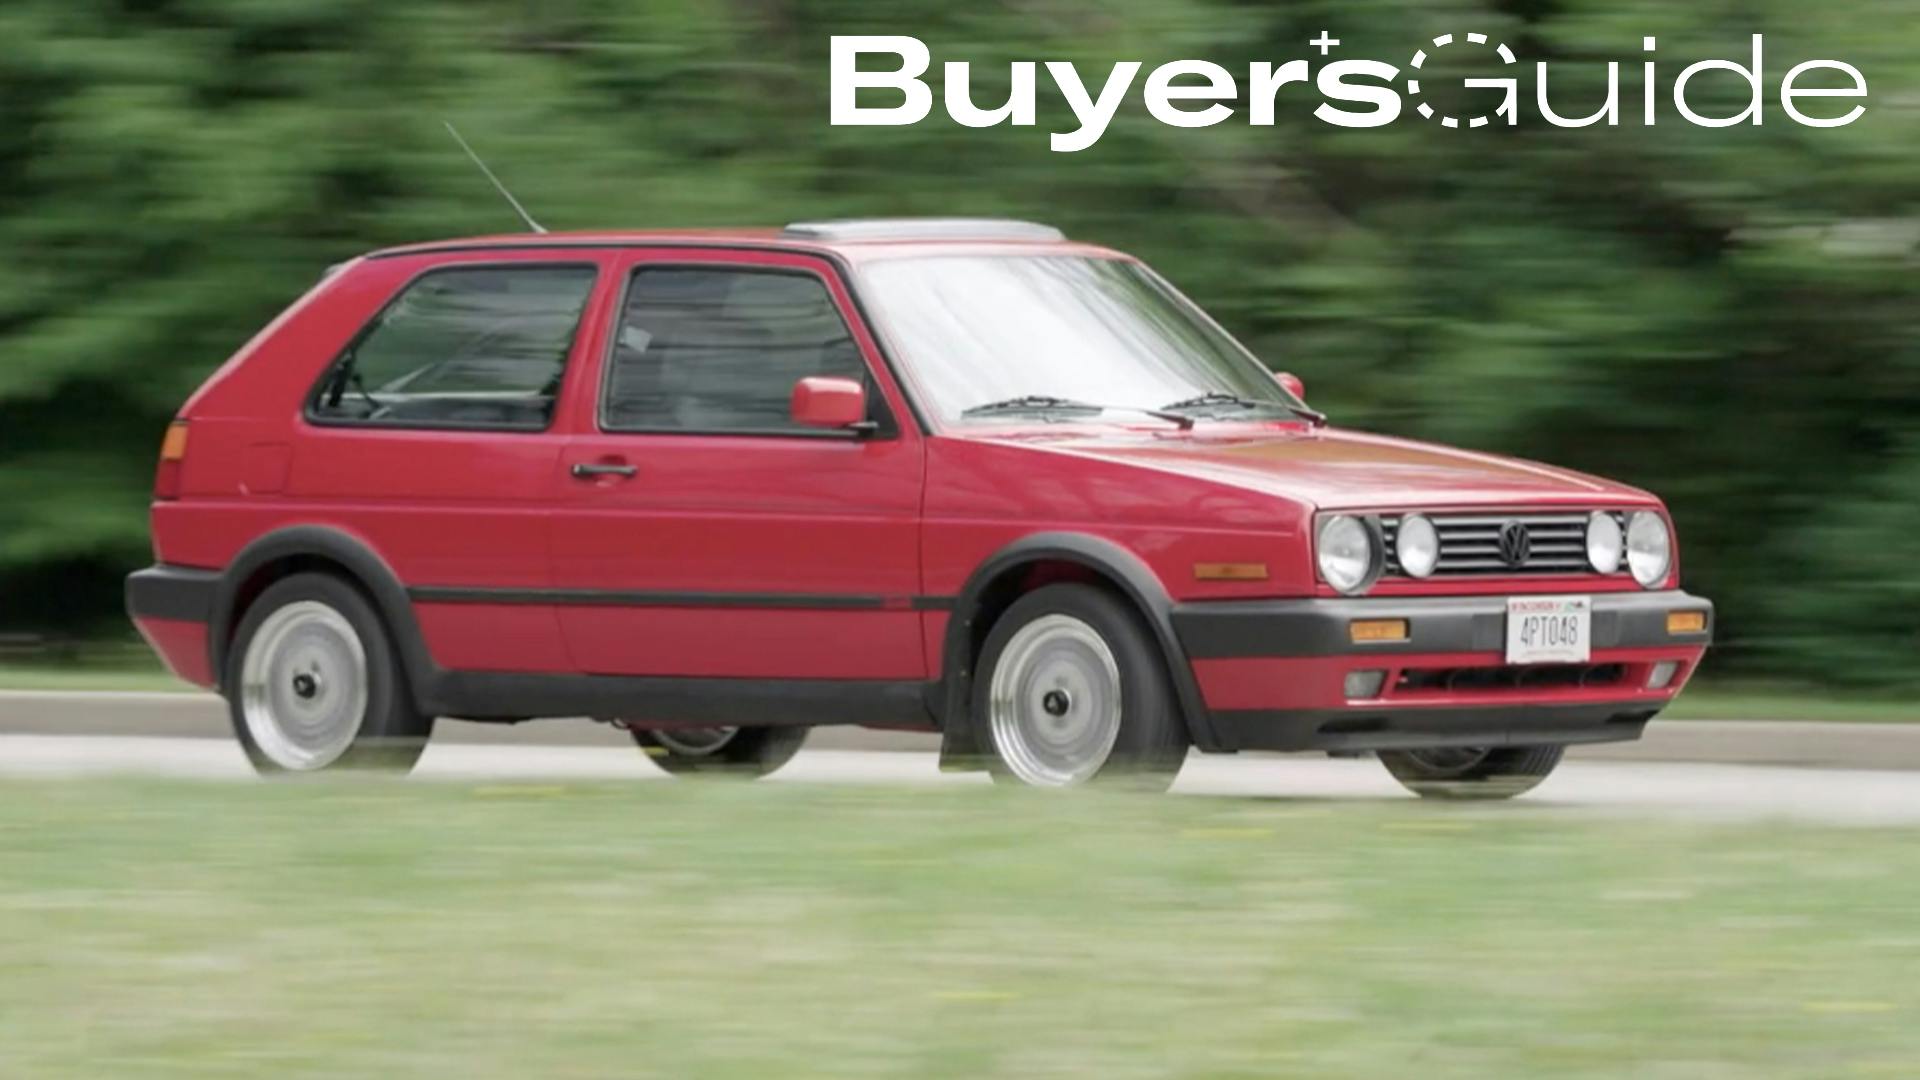 VW Golf buyers guide